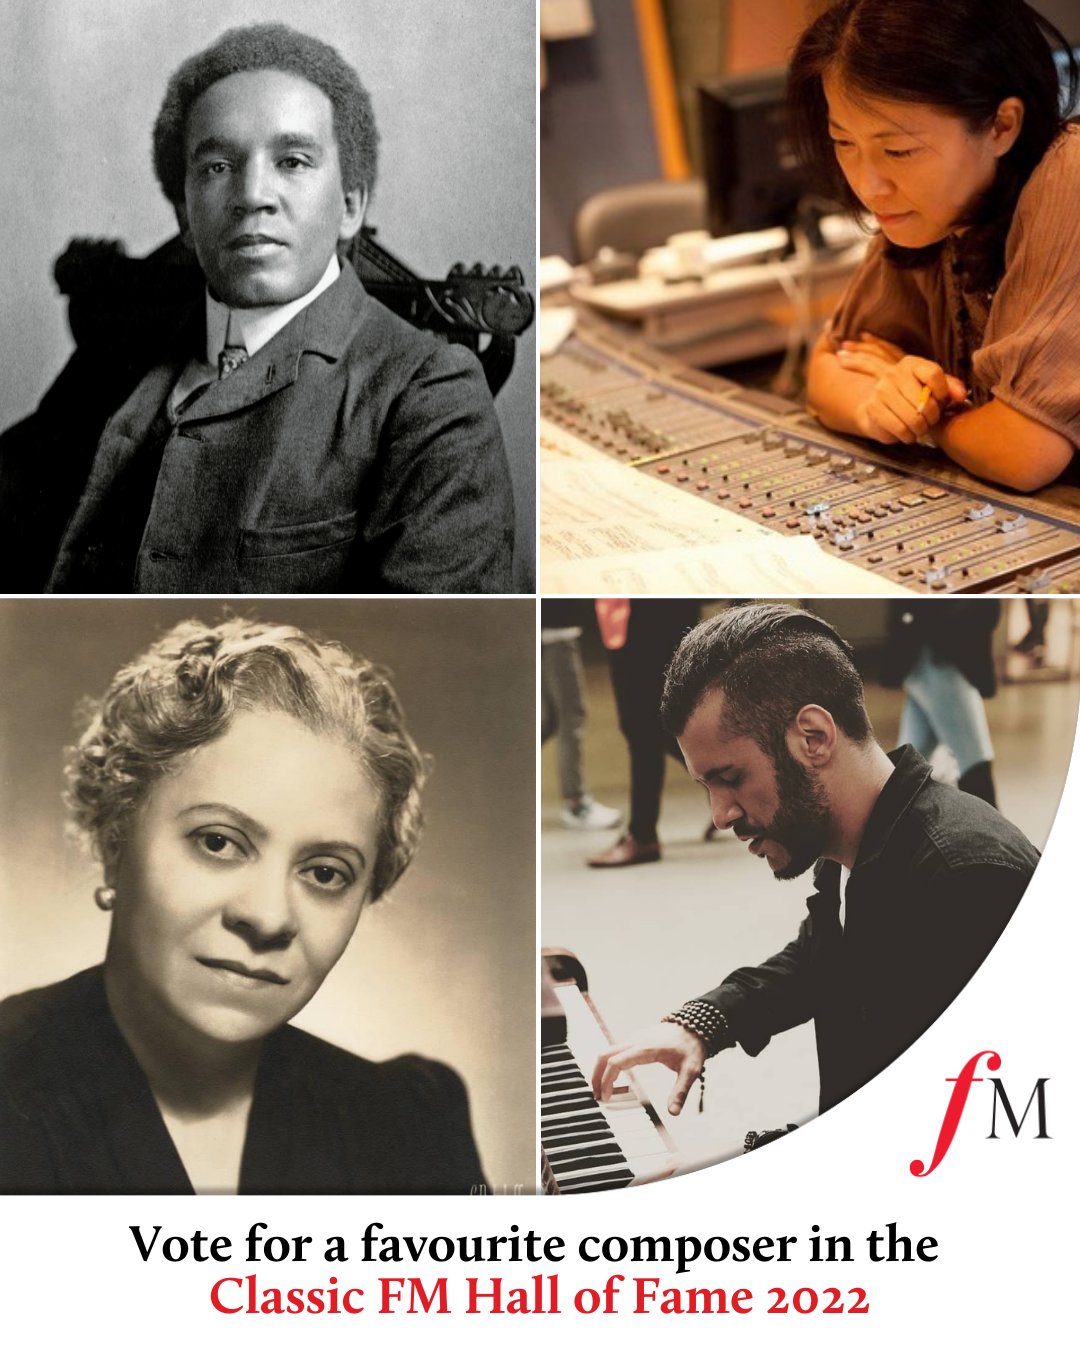 Classic FM on Twitter: "It's could be a work from English composer Samuel Coleridge-Taylor, video game maestro Yoko Shimomura, groundbreaking composer Florence Price, young composer-pianist @AlbertoGiurioli. Place your votes in